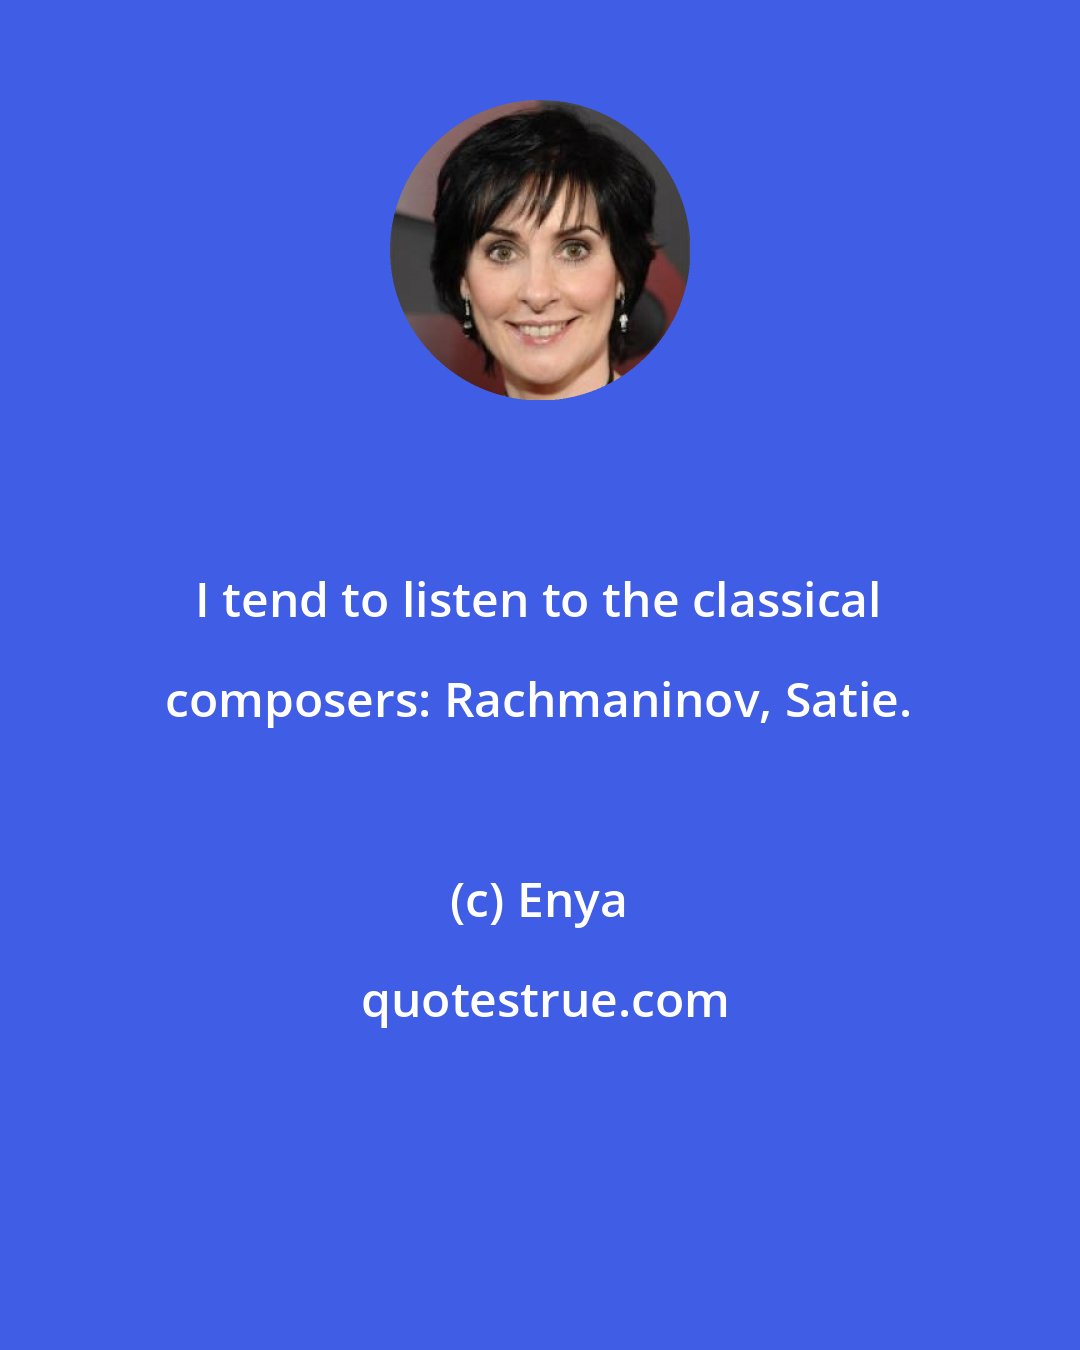 Enya: I tend to listen to the classical composers: Rachmaninov, Satie.